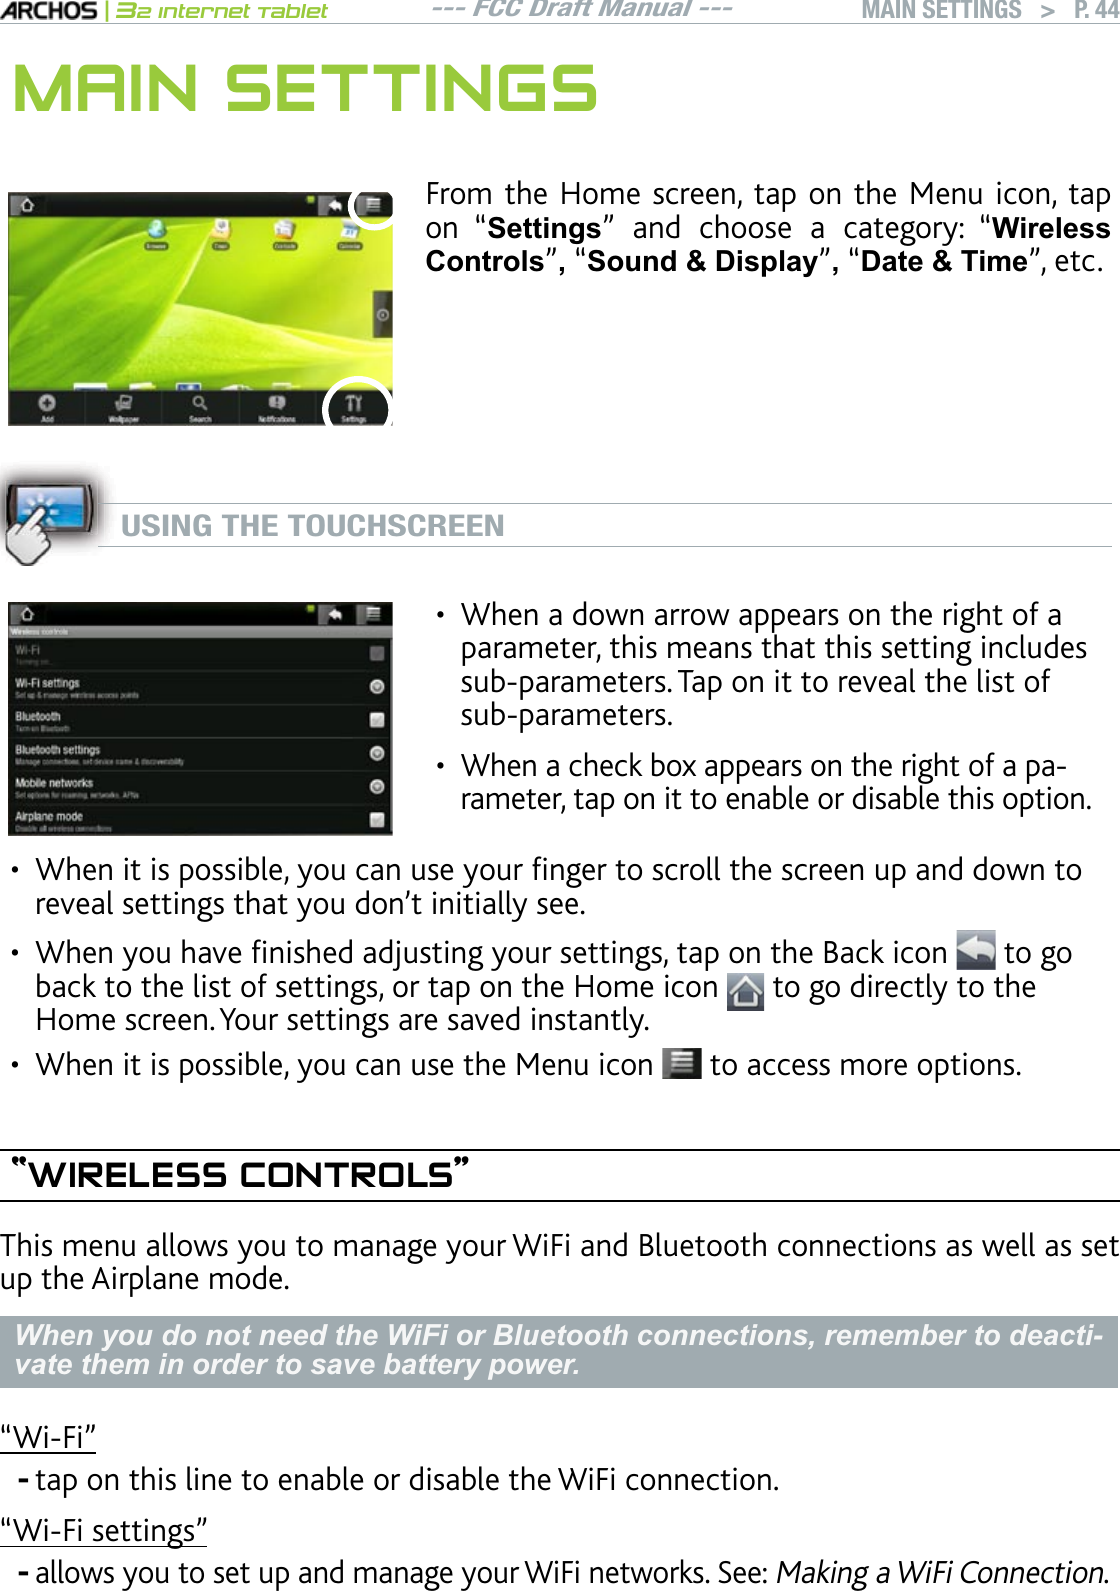 --- FCC Draft Manual ---|32 Internet TabletMAIN SETTINGS   &gt; P. 44MAIN SETTINGSFrom the Home screen, tap on the Menu icon, tap on “Settings” and choose a category: “Wireless Controls”,“Sound &amp; Display”,“&apos;DWH7LPH”, etc.USING THE TOUCHSCREENWhen a down arrow appears on the right of a parameter, this means that this setting includes UWDRCTCOGVGTU6CRQPKVVQTGXGCNVJGNKUVQHUWDRCTCOGVGTUWhen a check box appears on the right of a parameter, tap on it to enable or disable this option. ••9JGPKVKURQUUKDNG[QWECPWUG[QWTÒPIGTVQUETQNNVJGUETGGPWRCPFFQYPVQTGXGCNUGVVKPIUVJCV[QWFQPlVKPKVKCNN[UGG9JGP[QWJCXGÒPKUJGFCFLWUVKPI[QWTUGVVKPIUVCRQPVJG$CEMKEQP  to go back to the list of settings, or tap on the Home icon   to go directly to the Home screen. Your settings are saved instantly.When it is possible, you can use the Menu icon   to access more options. “WIRELESS CONTROLS”This menu allows you to manage your WiFi and Bluetooth connections as well as set up the Airplane mode.When you do not need the WiFi or Bluetooth connections, remember to deacti-vate them in order to save battery power.m9K(Kntap on this line to enable or disable the WiFi connection.m9K(KUGVVKPIUnallows you to set up and manage your WiFi networks. See: Making a WiFi Connection.•••--